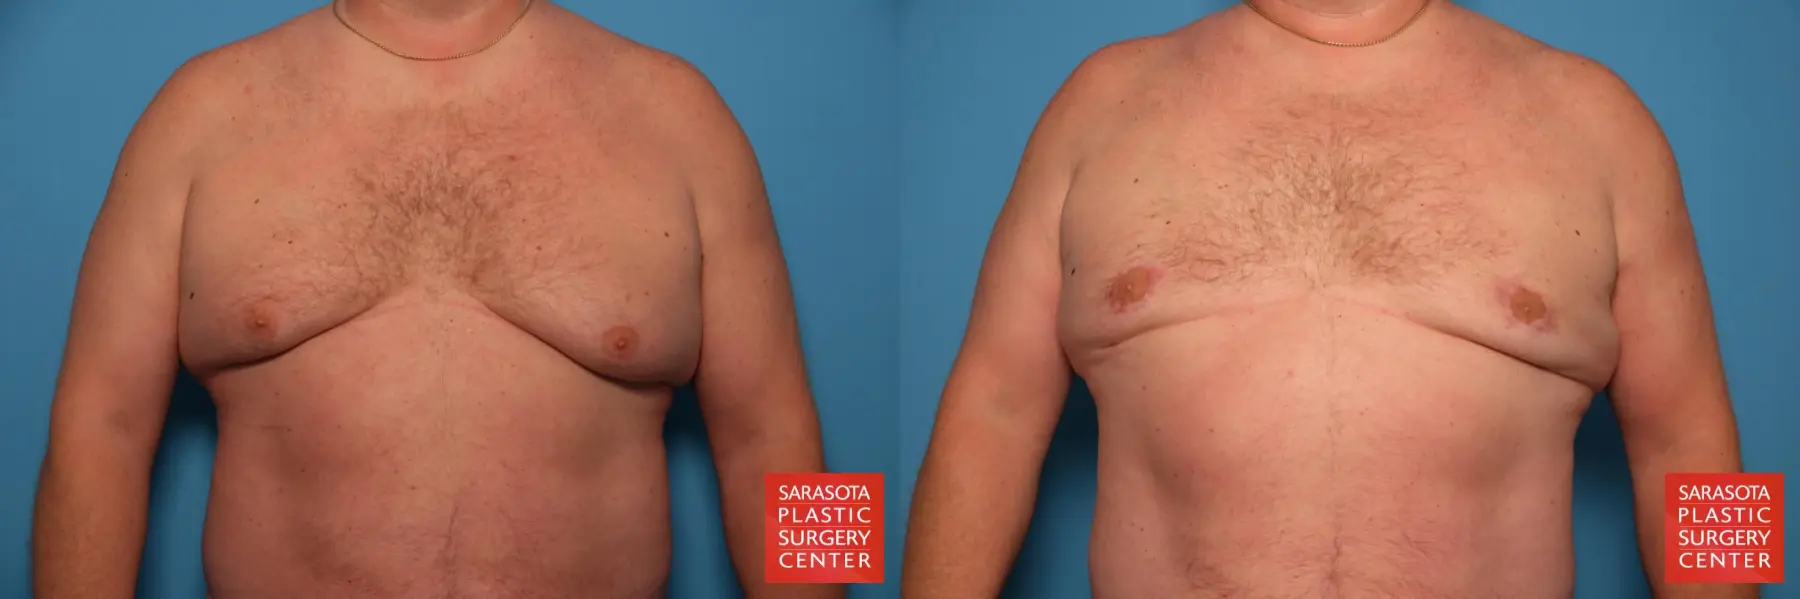 Gynecomastia: Patient 12 - Before and After  